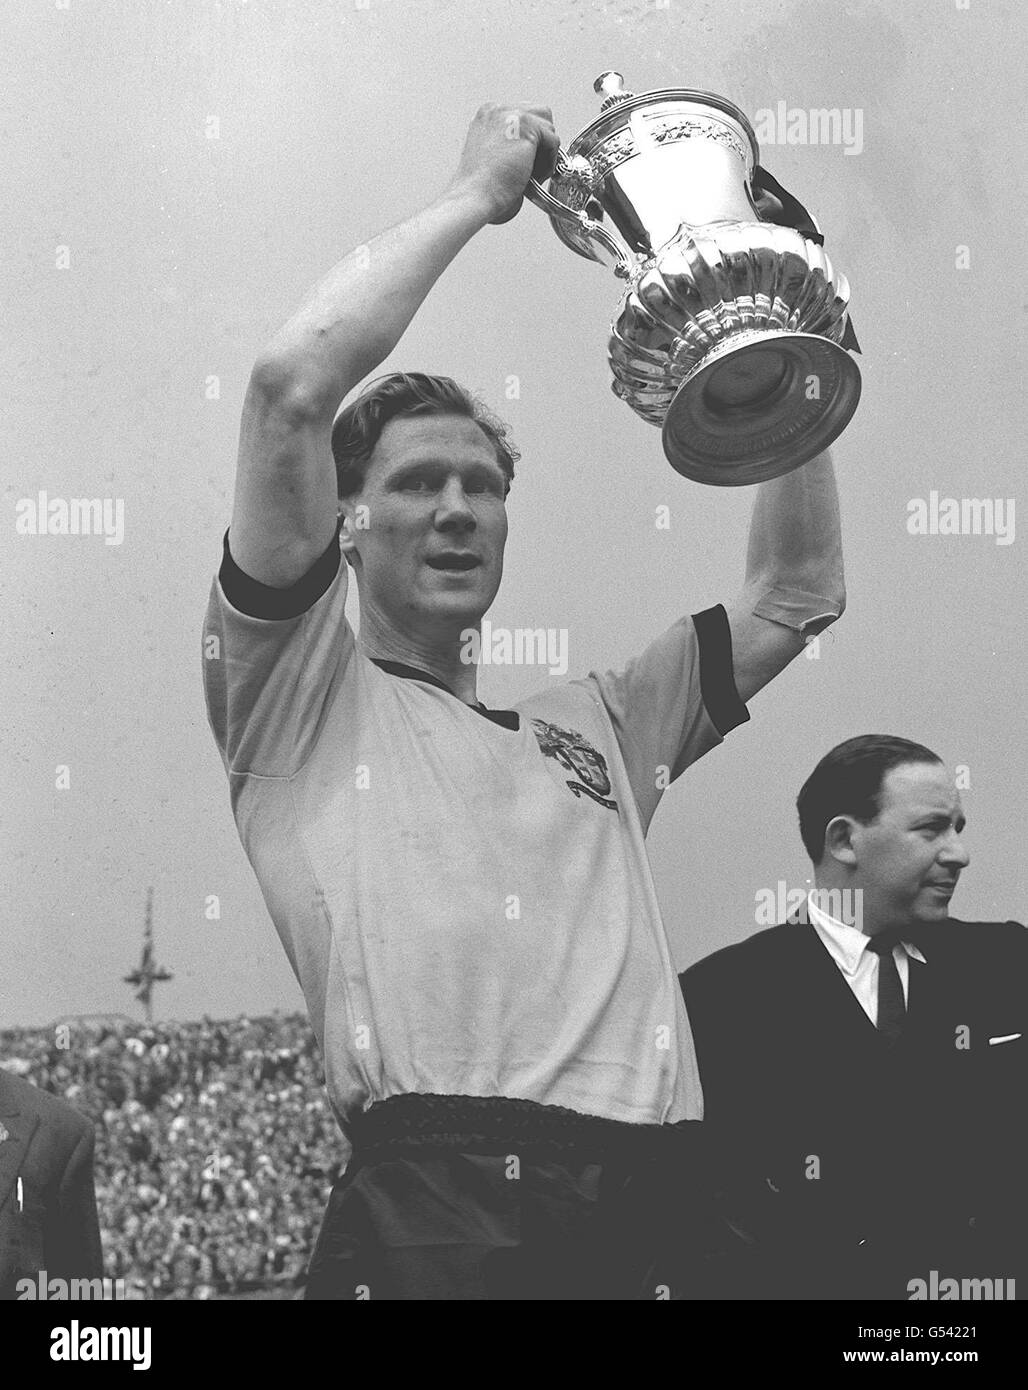 Bill Slater Wolverhamton captain and footballer of the yesr, happilly hold aloft the FA Cup at Wembley, London on the 7th of May 1960 after his team defeated Blackburn Rovers 3-0. Stock Photo